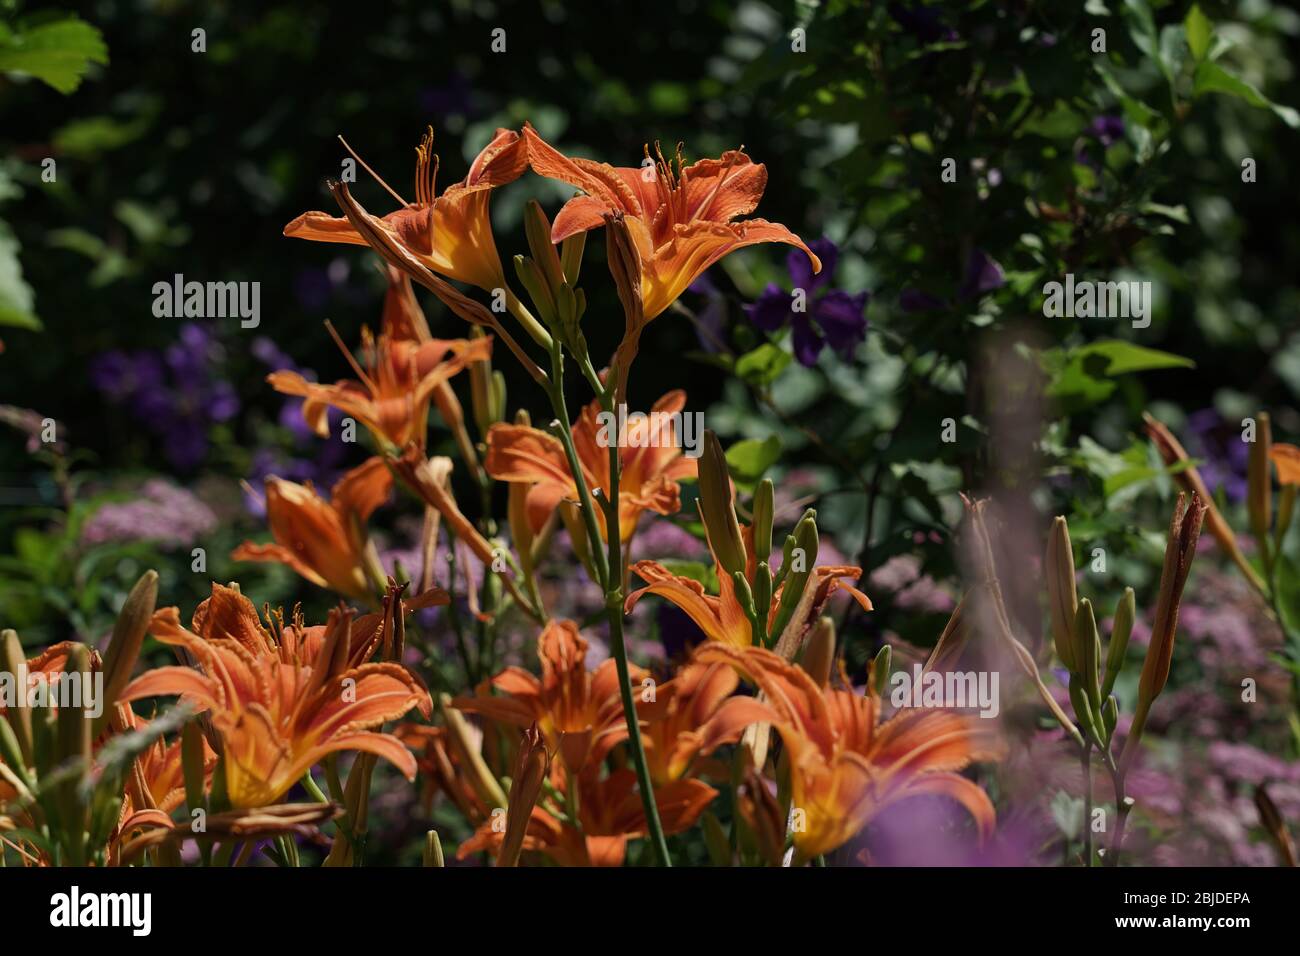 Day lily is a perennial flower. Most species of lilies open in early morning and wither during the following night. Some species of Hemerocallidoideae Stock Photo